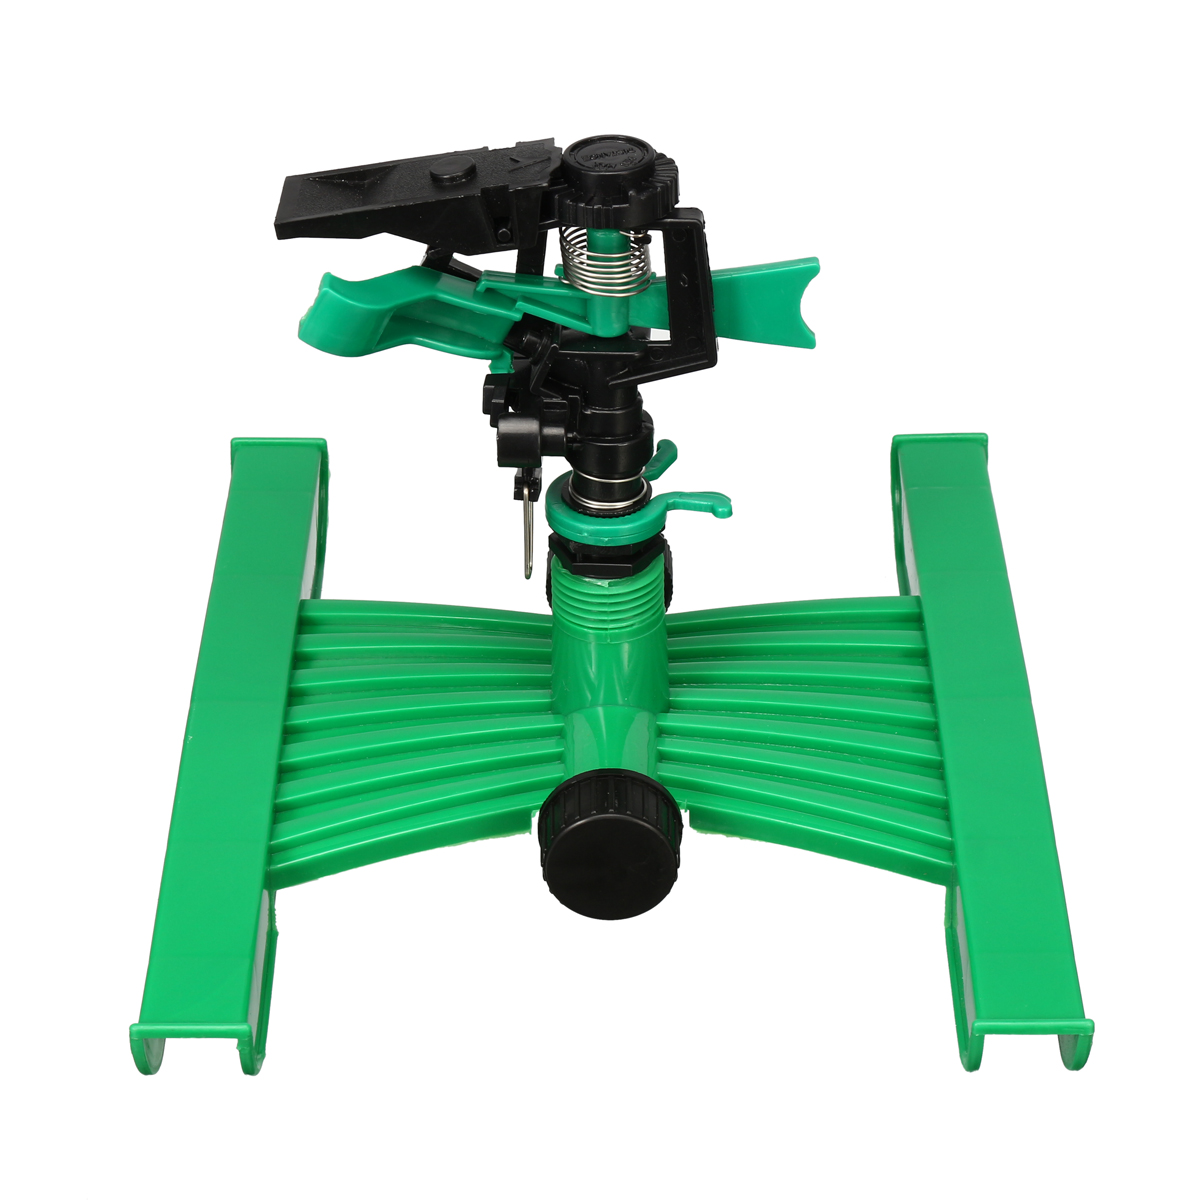 H-Base-Plastic-Auto-Rotating-Lawn-Sprinkler-Garden-Lawn-Plant-Grass-Watering-Tool-1558817-2